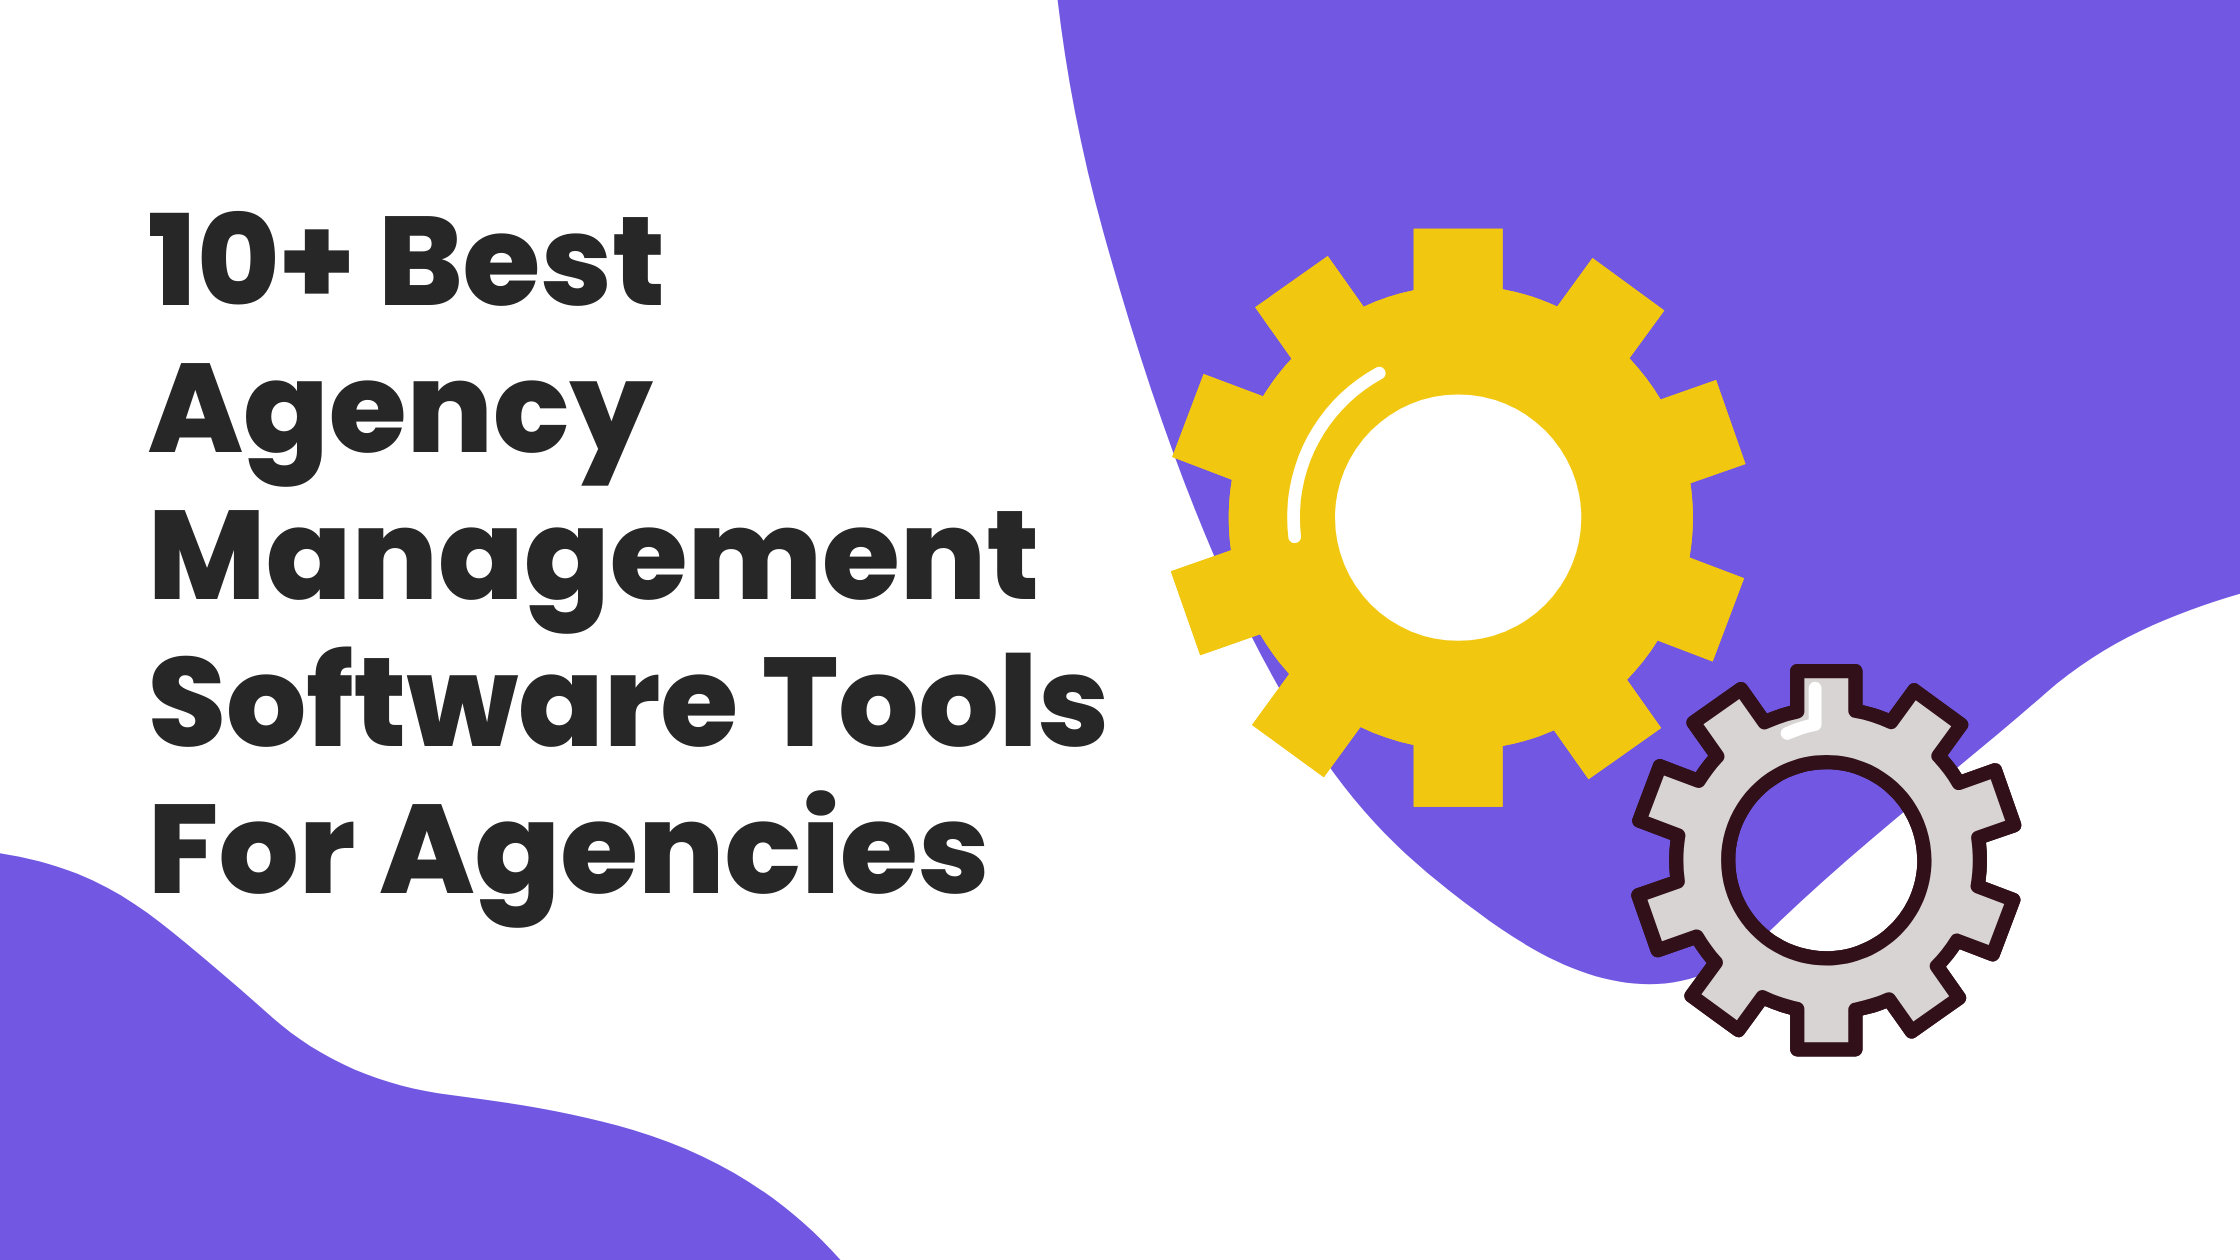 10+ Best Agency Management Software Tools For Agencies